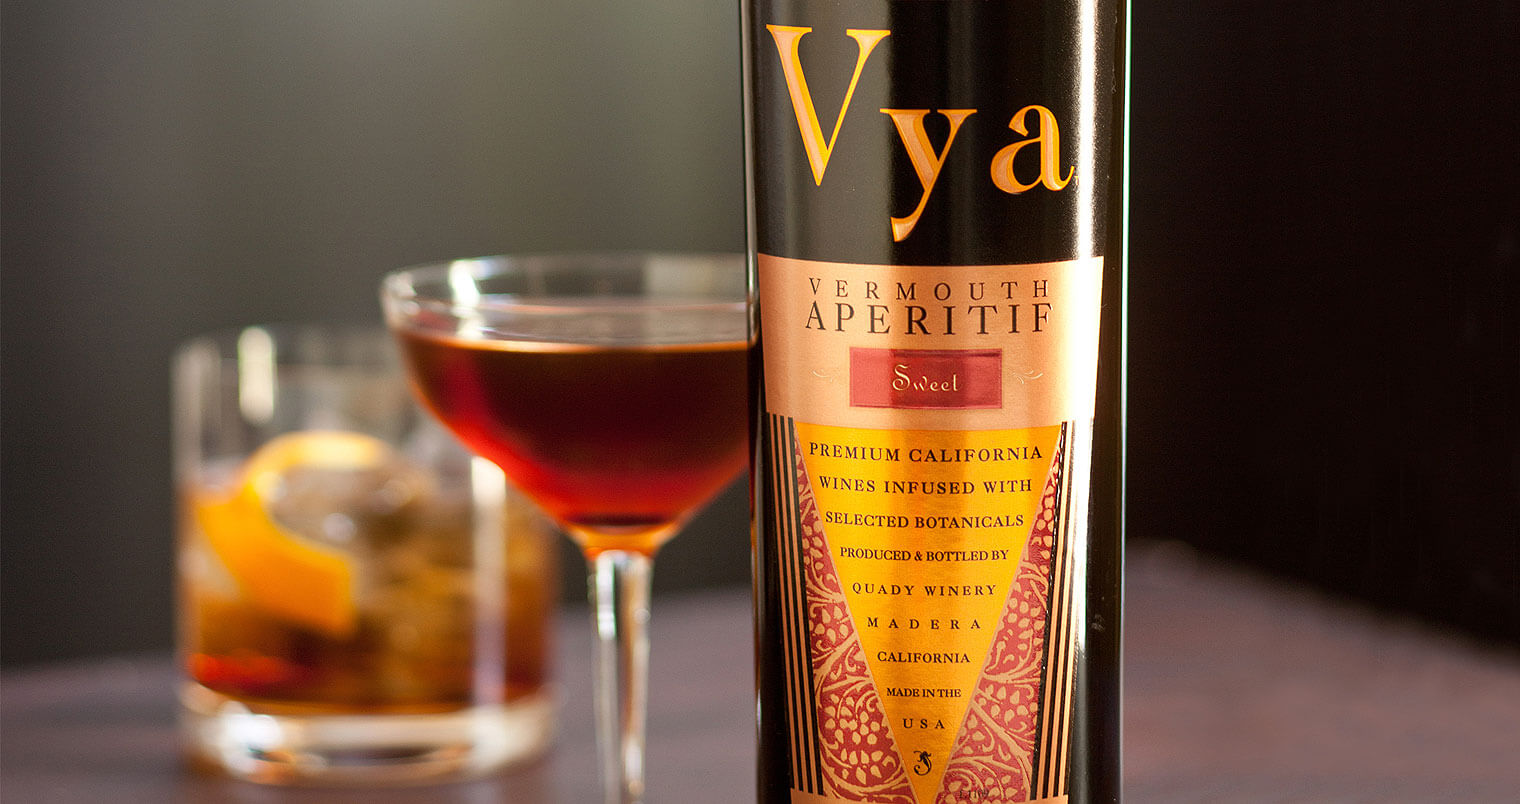 Celebrate Manhattan Month this October with Vya Vermouth, featured image